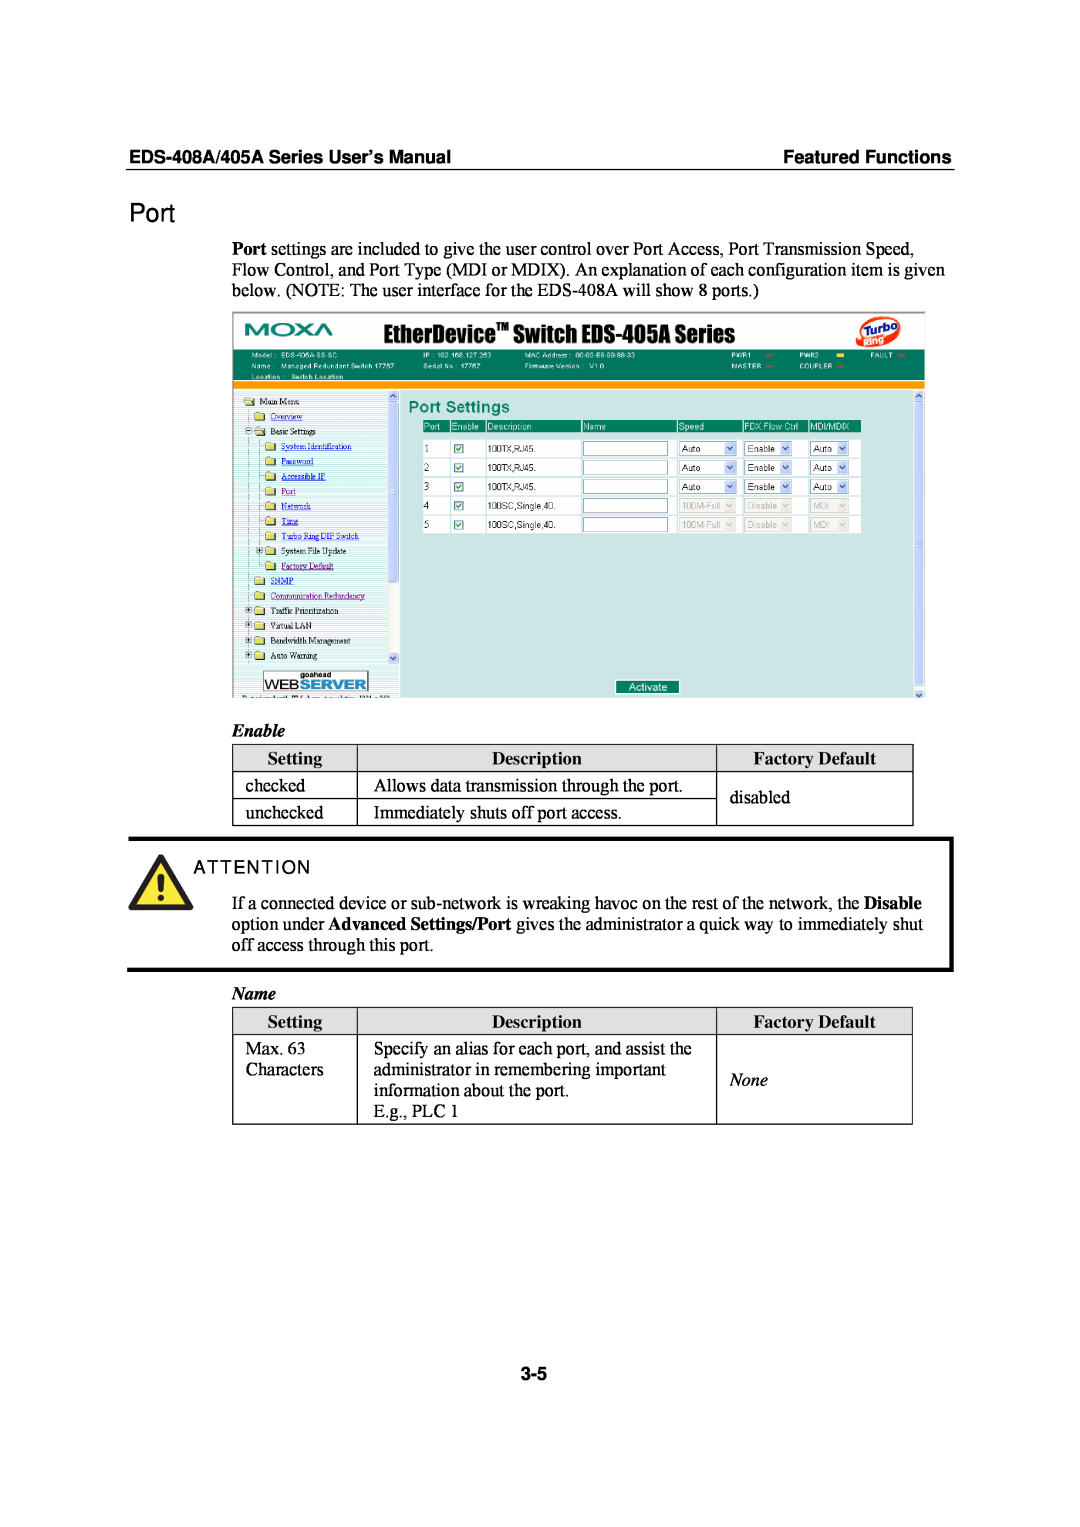 Moxa Technologies Port, Enable, Name, EDS-408A/405A Series User’s Manual, Featured Functions, Setting, Description 